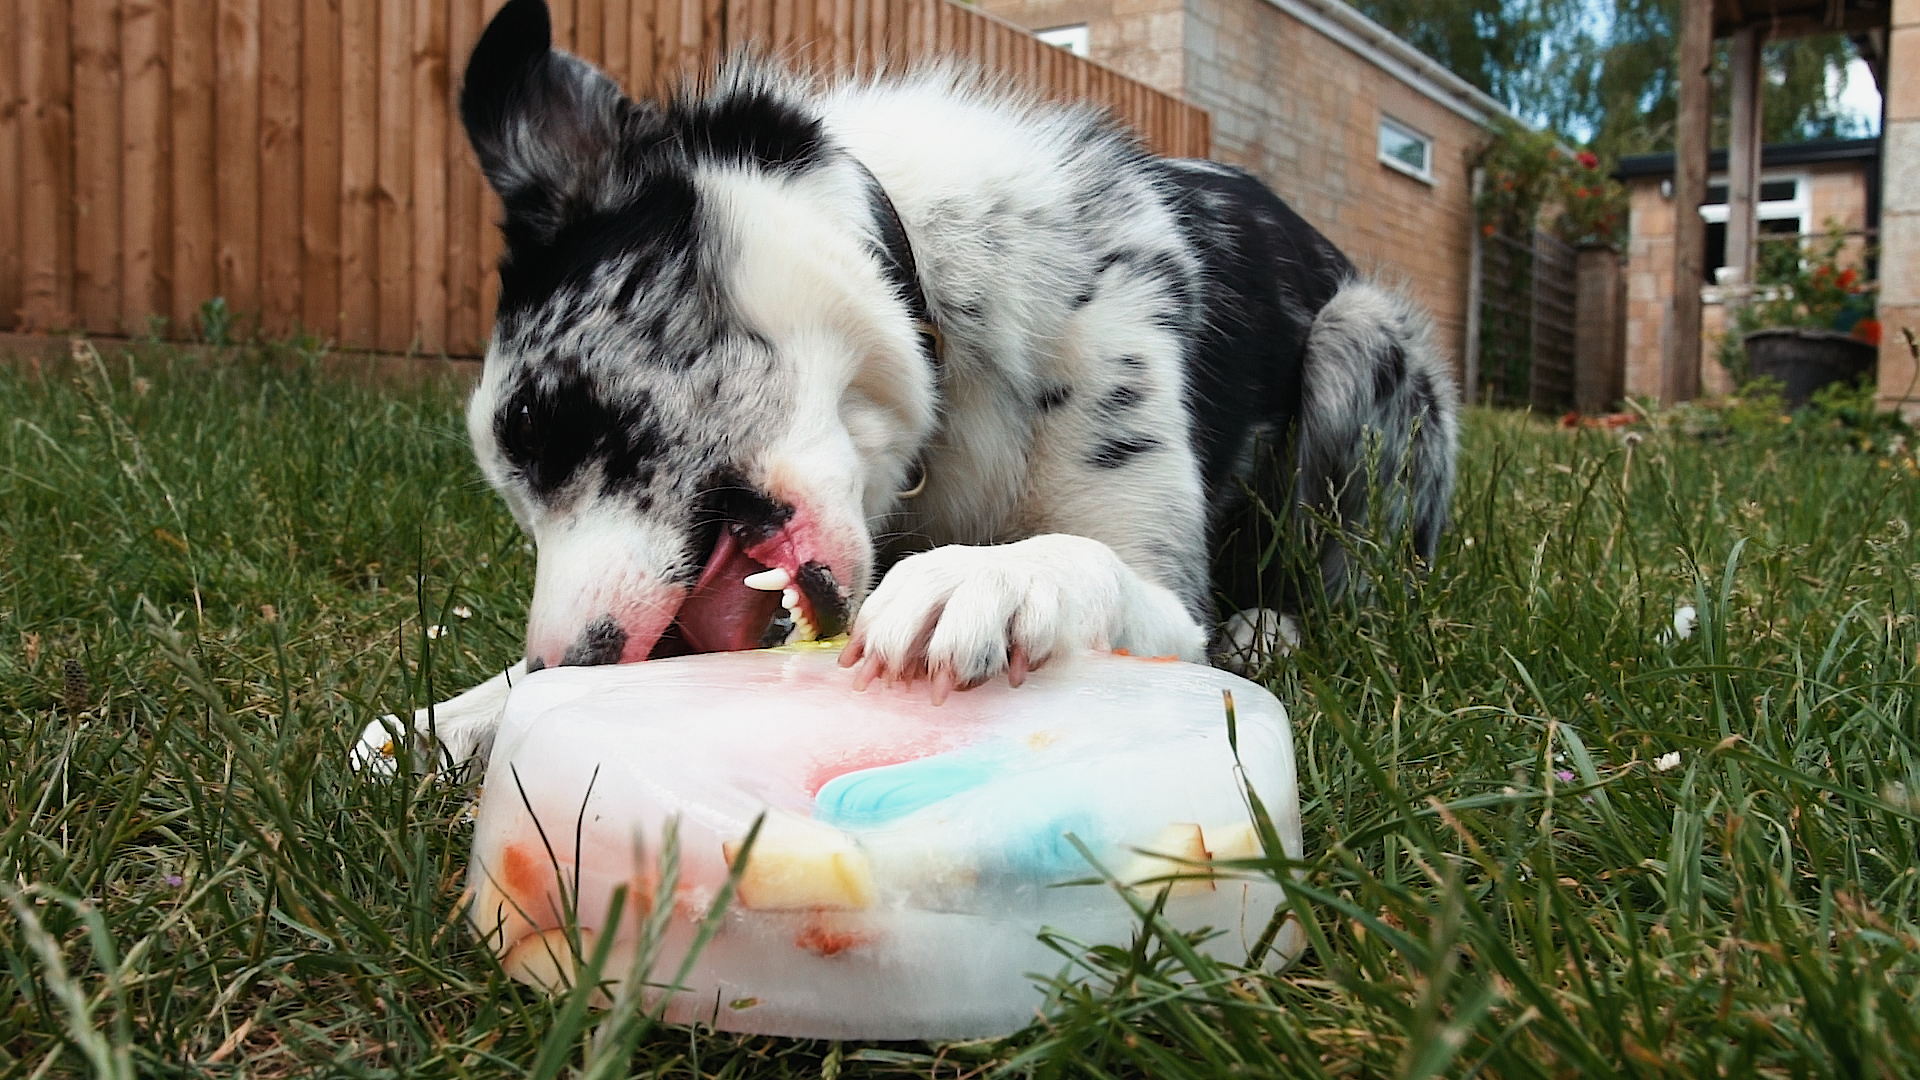 Collie tucking into an ice block filled with treats and toys